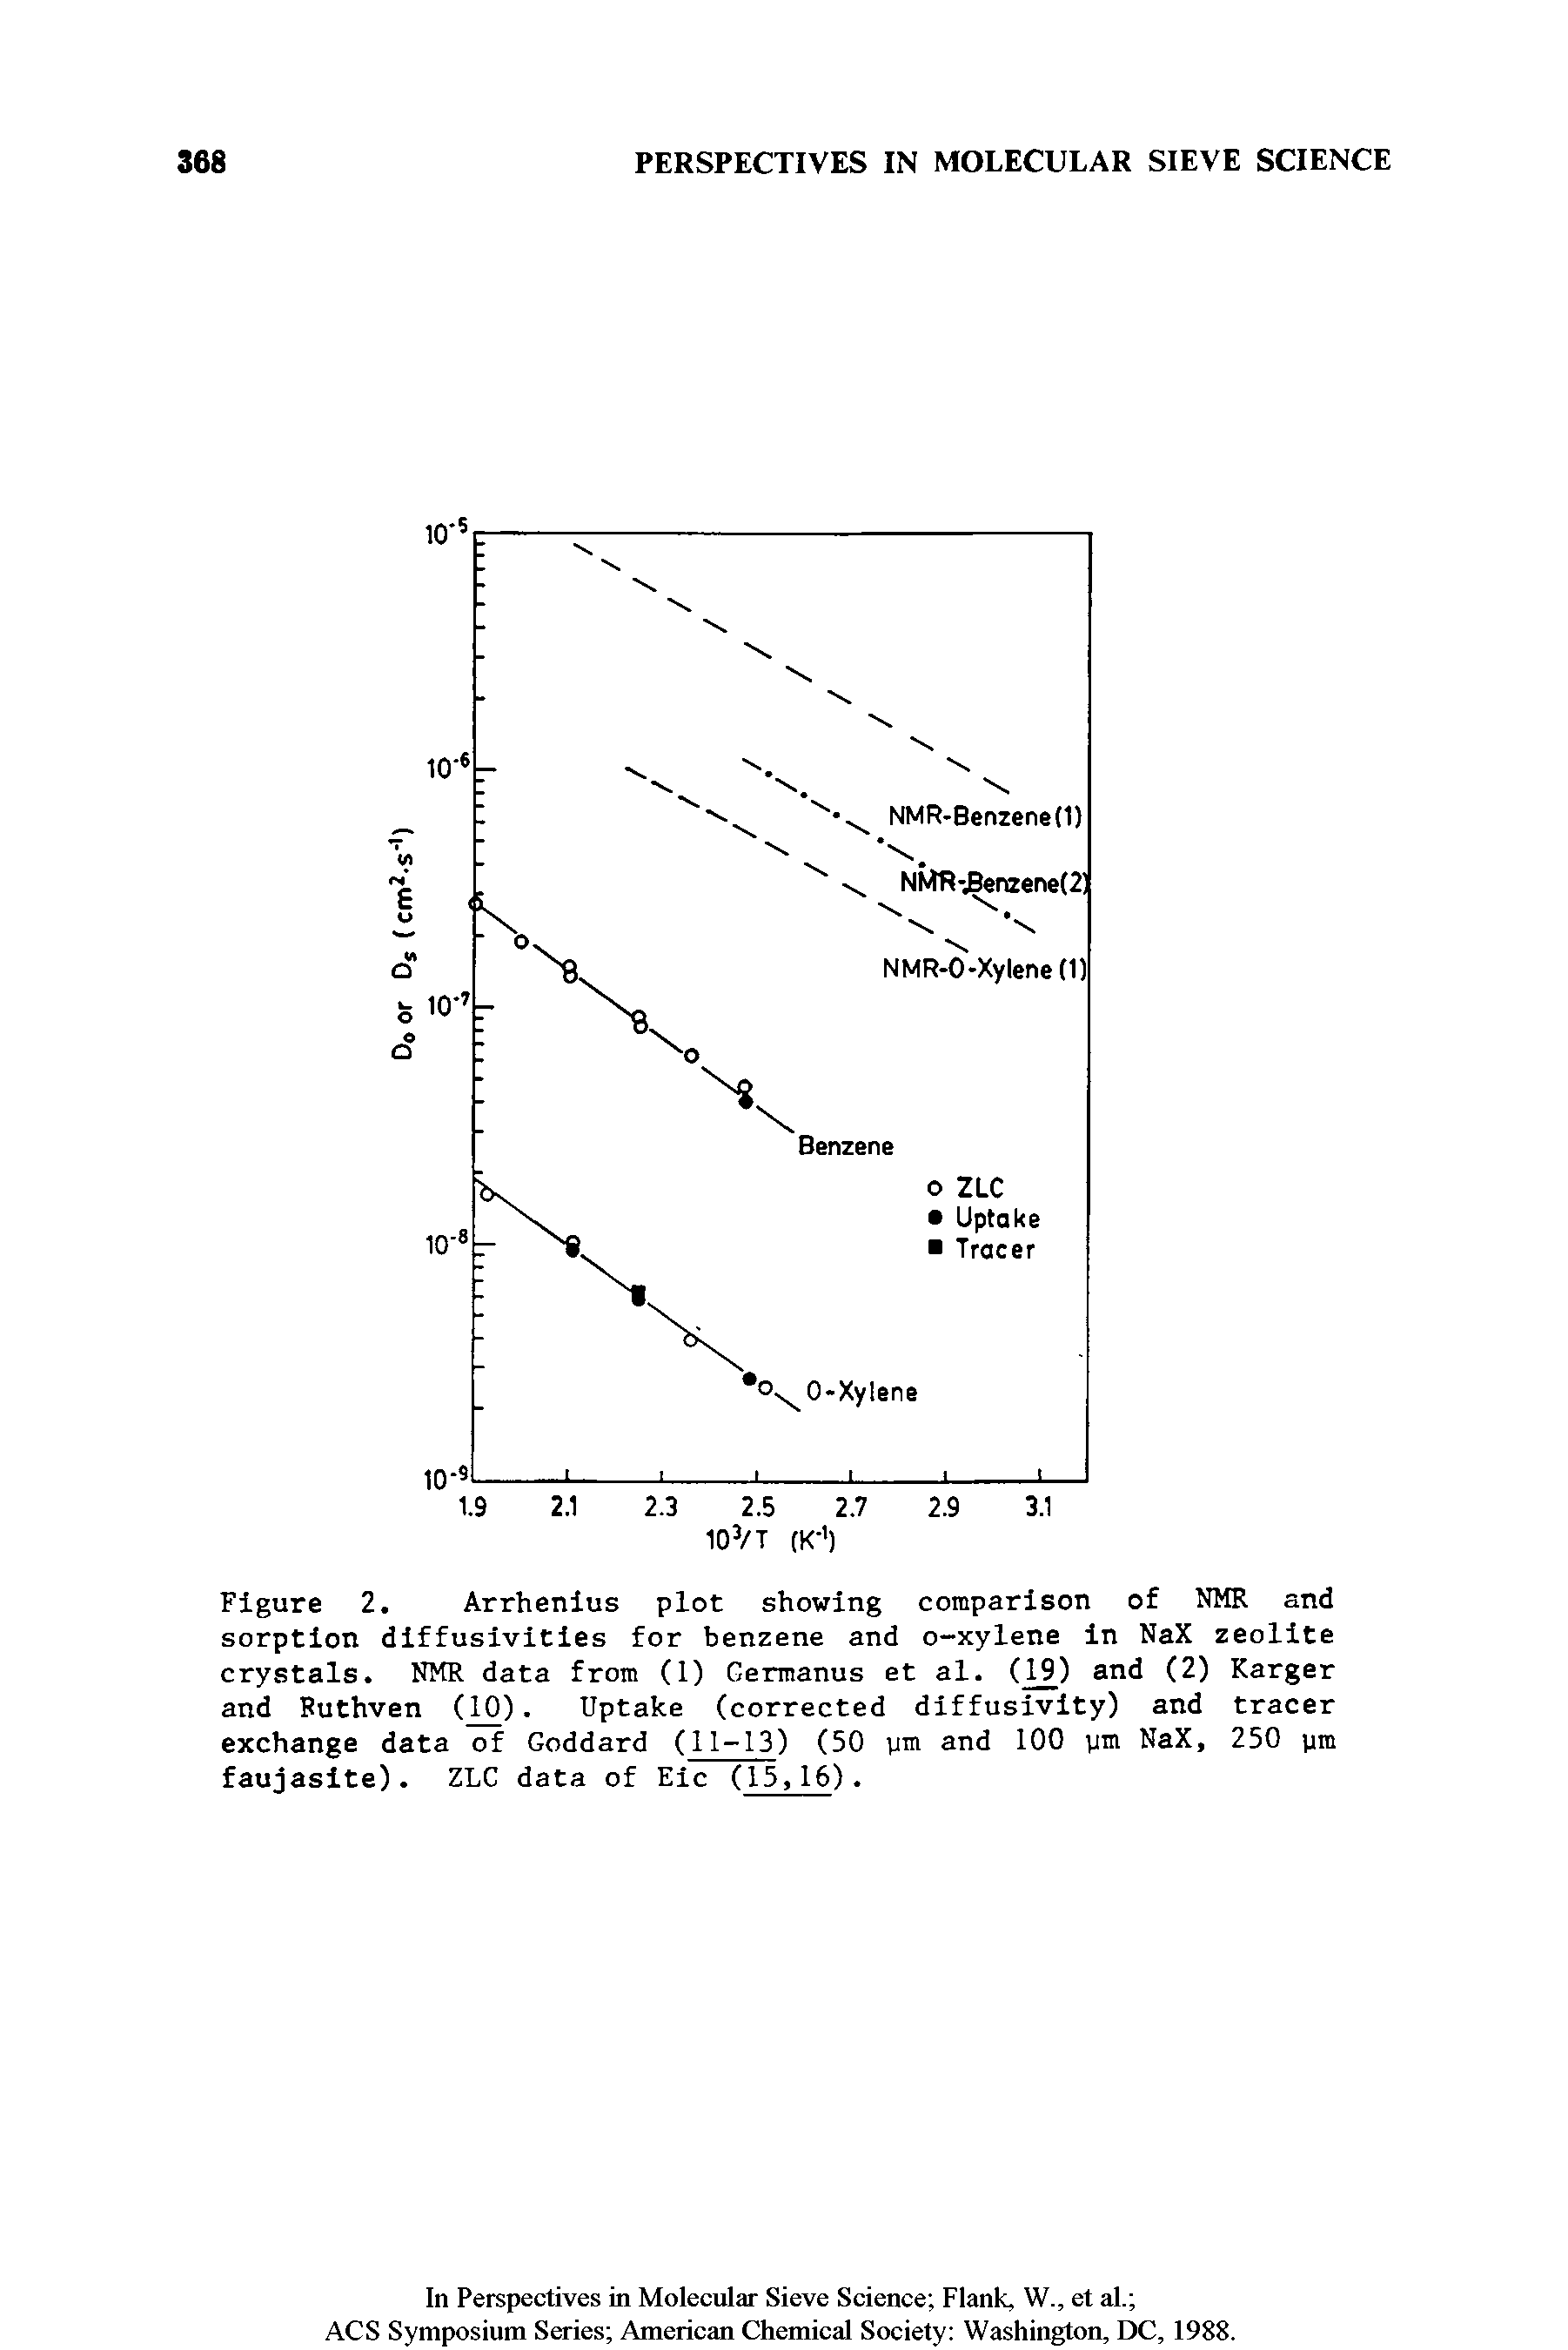 Figure 2. Arrhenius plot showing comparison of NMR and sorption diffusivities for benzene and o-xylene in NaX zeolite crystals. NMR data from (1) Germanus et al. (19) and (2) Karger and Ruthven (10). Uptake (corrected diffusivity) and tracer exchange data of Goddard (11-13) (50 pm and 100 pm NaX, 250 pm faujasite). ZLC data of Eic (15,16).